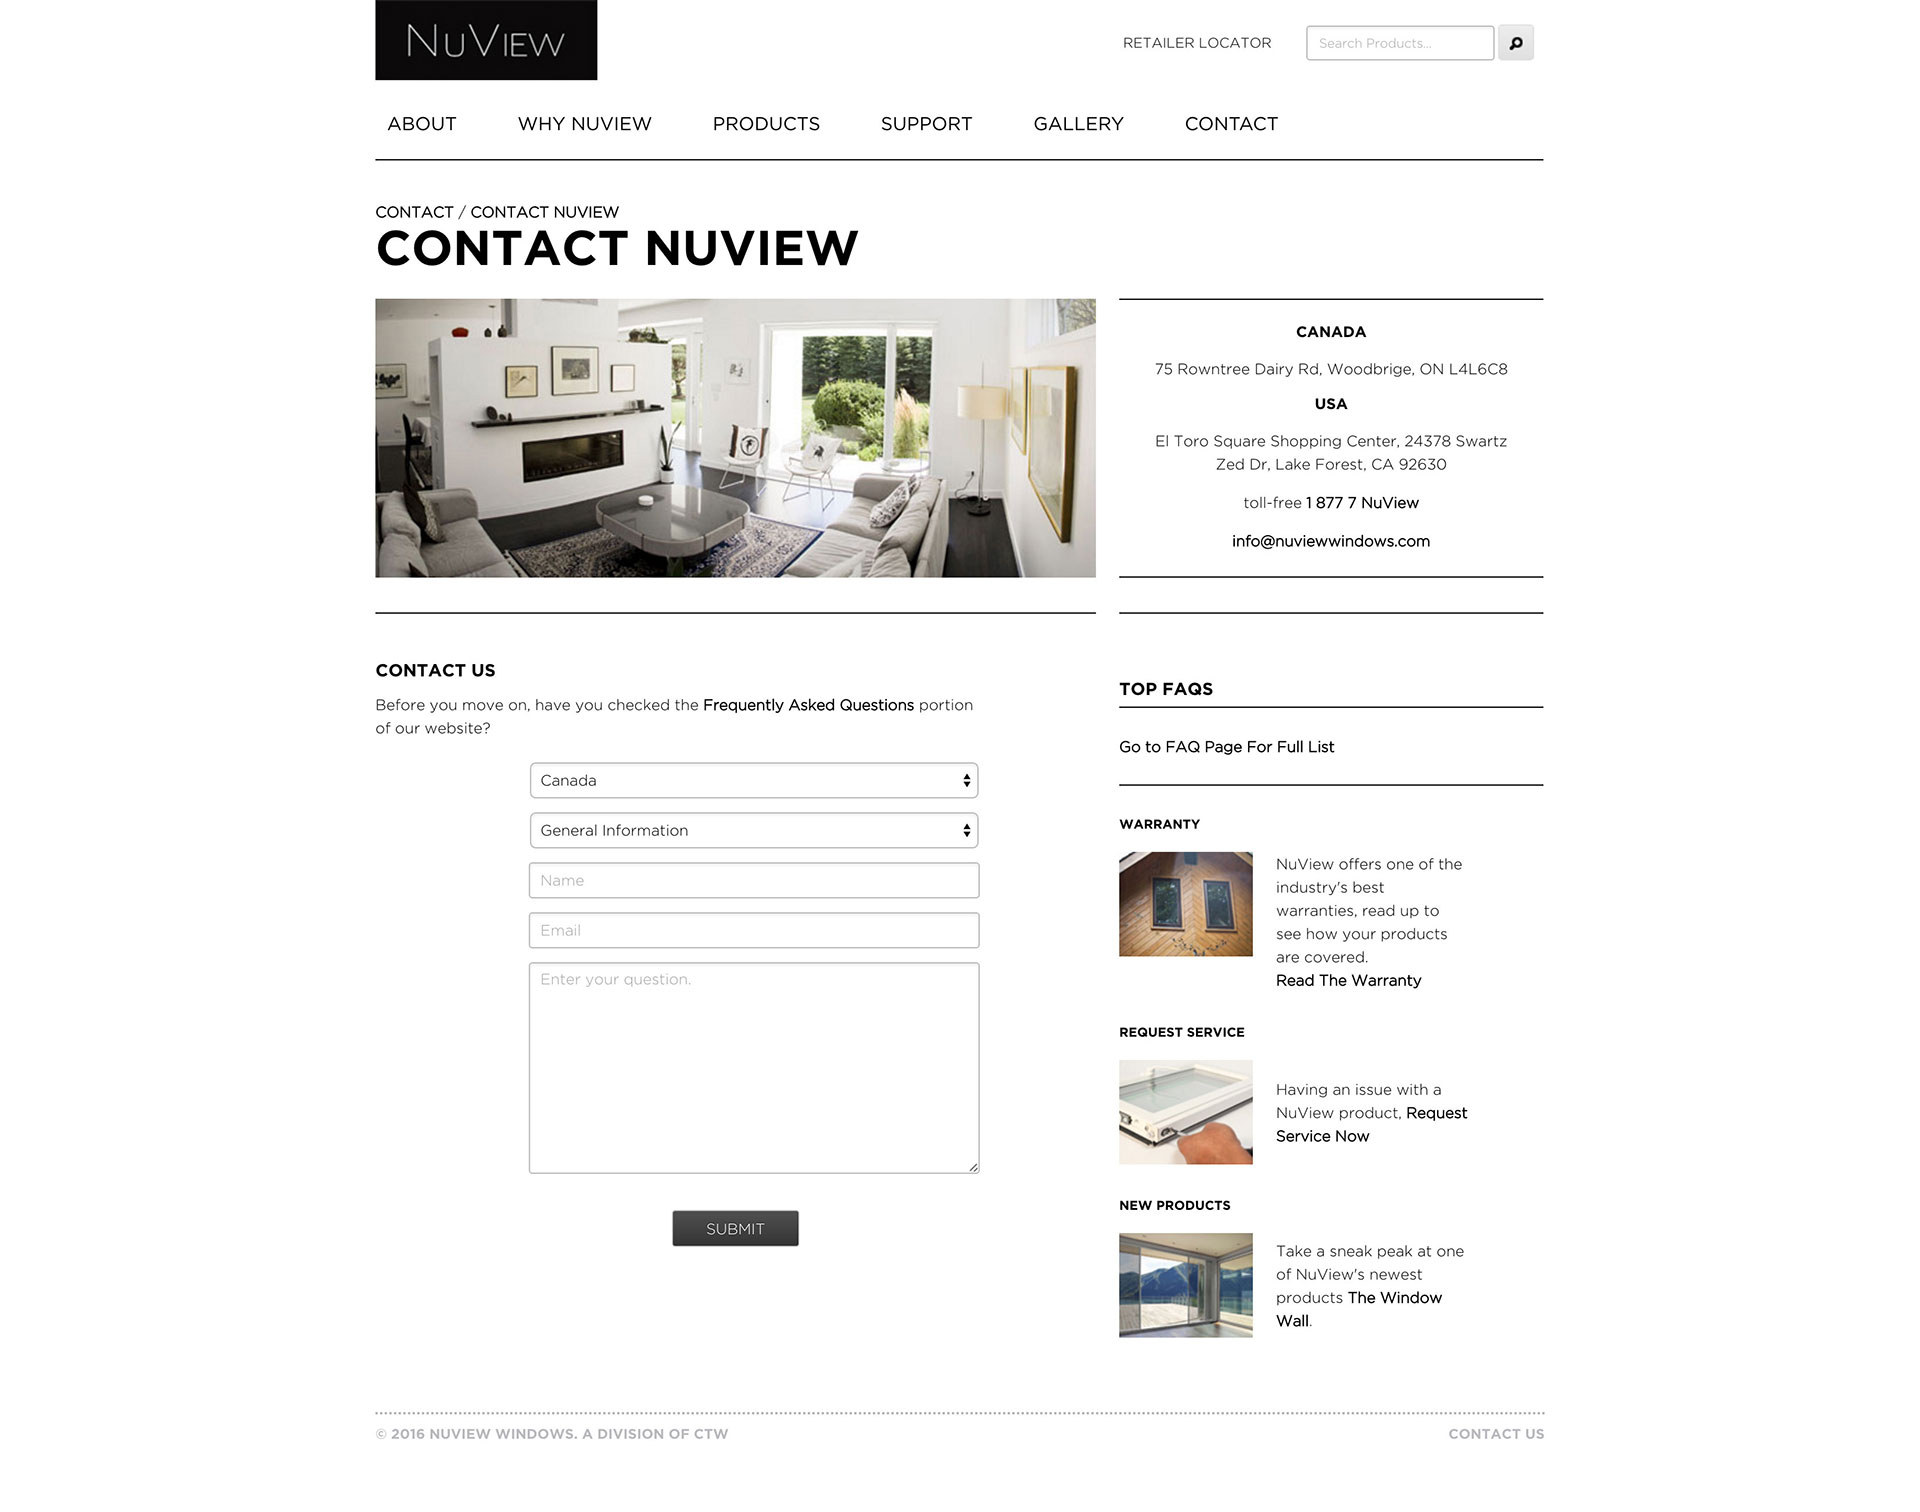 NuView Windows contact page